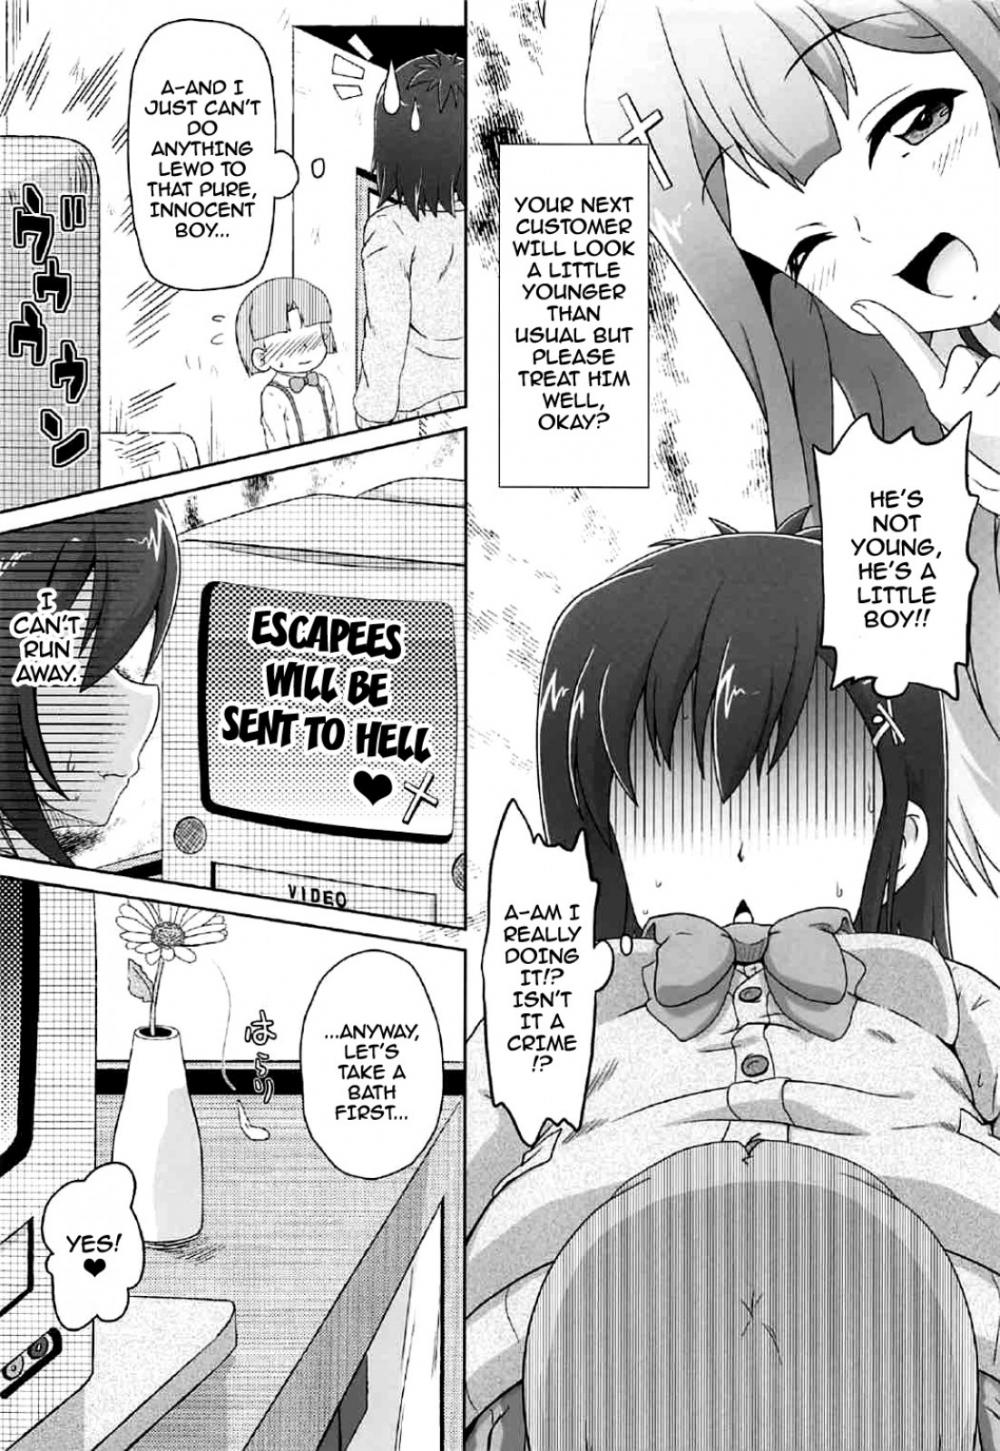 Devil and Angel Both Working At a Sex Brothel-Read-Hentai Manga Hentai Comic